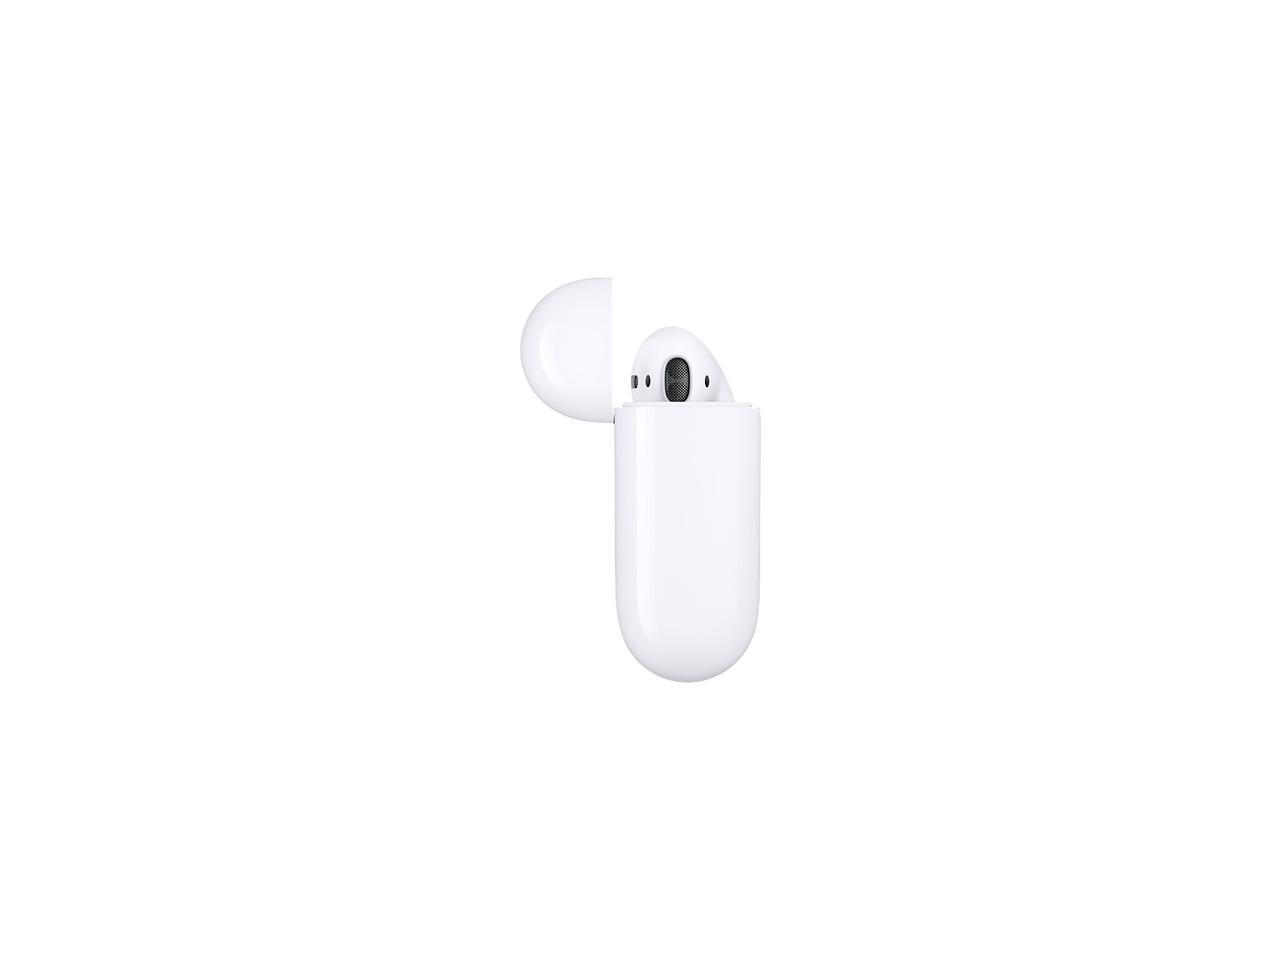 NEW Apple Airpods Wireless Bluetooth Headset - White (1st Generation)